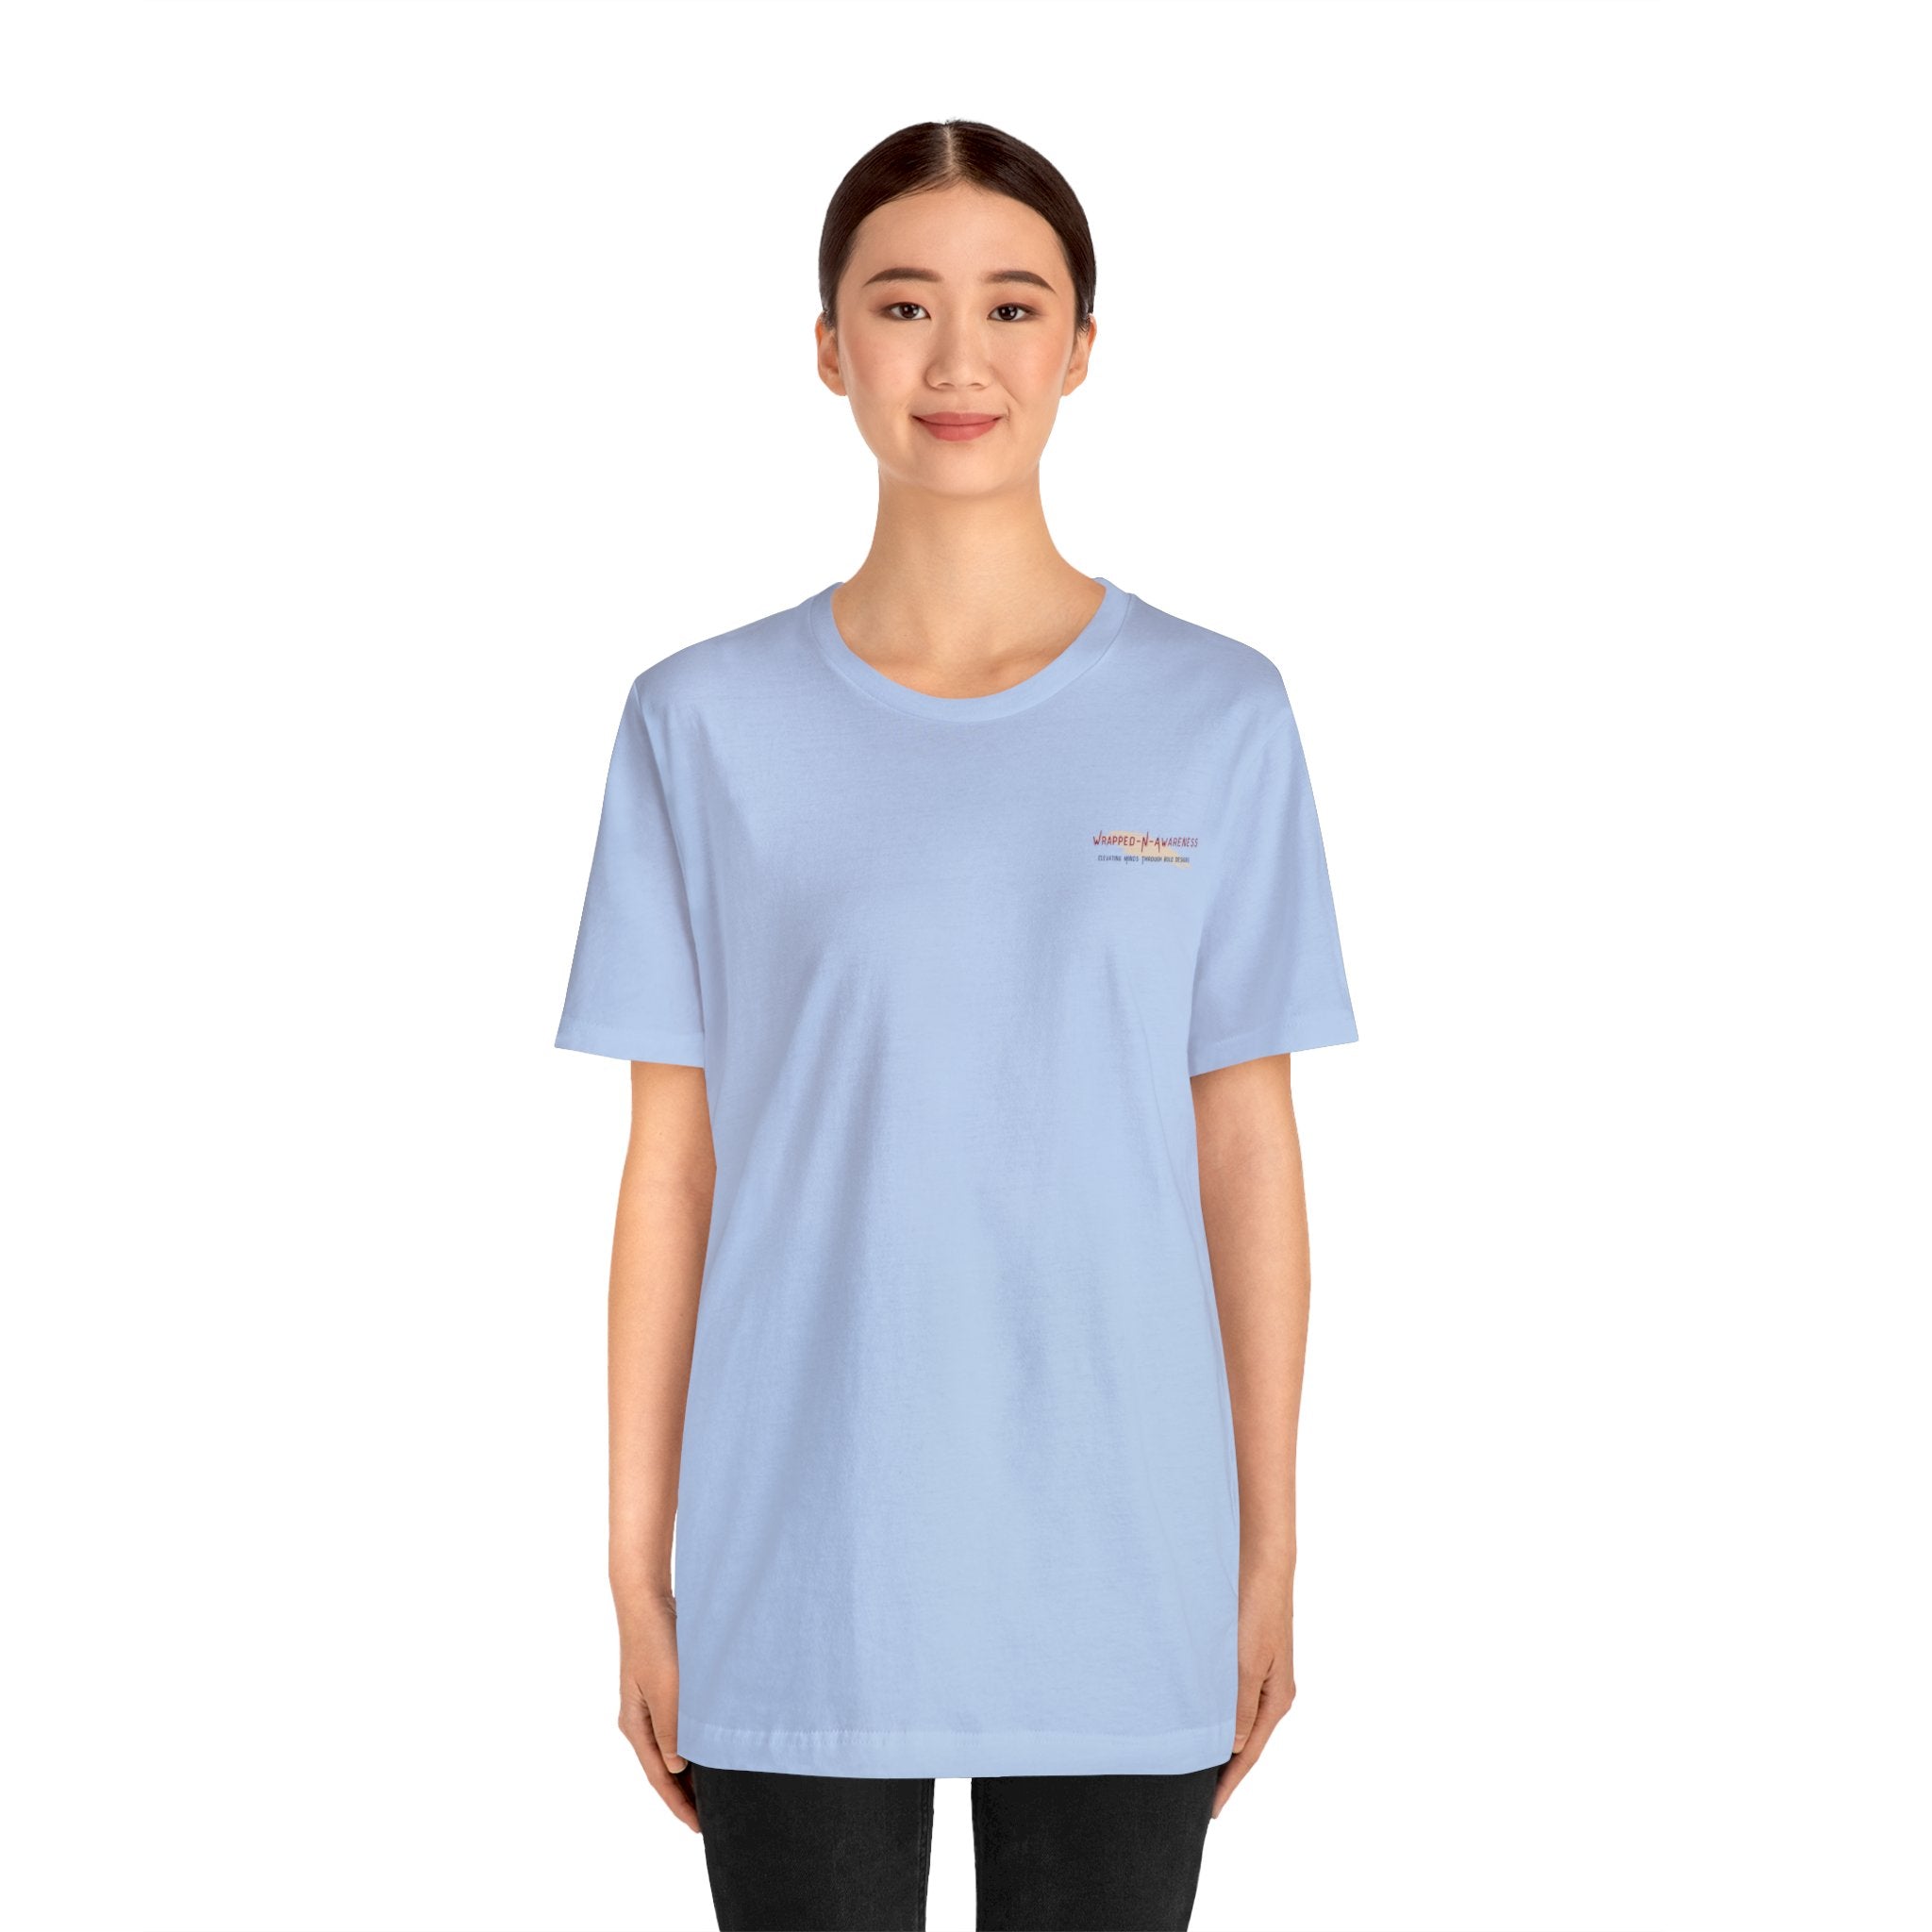 Hope Conquers Fear Jersey Tee - Bella+Canvas 3001 Heather Ice Blue Airlume Cotton Bella+Canvas 3001 Crew Neckline Jersey Short Sleeve Lightweight Fabric Mental Health Support Retail Fit Tear-away Label Tee Unisex Tee T-Shirt 3711323328870627993_2048 Printify